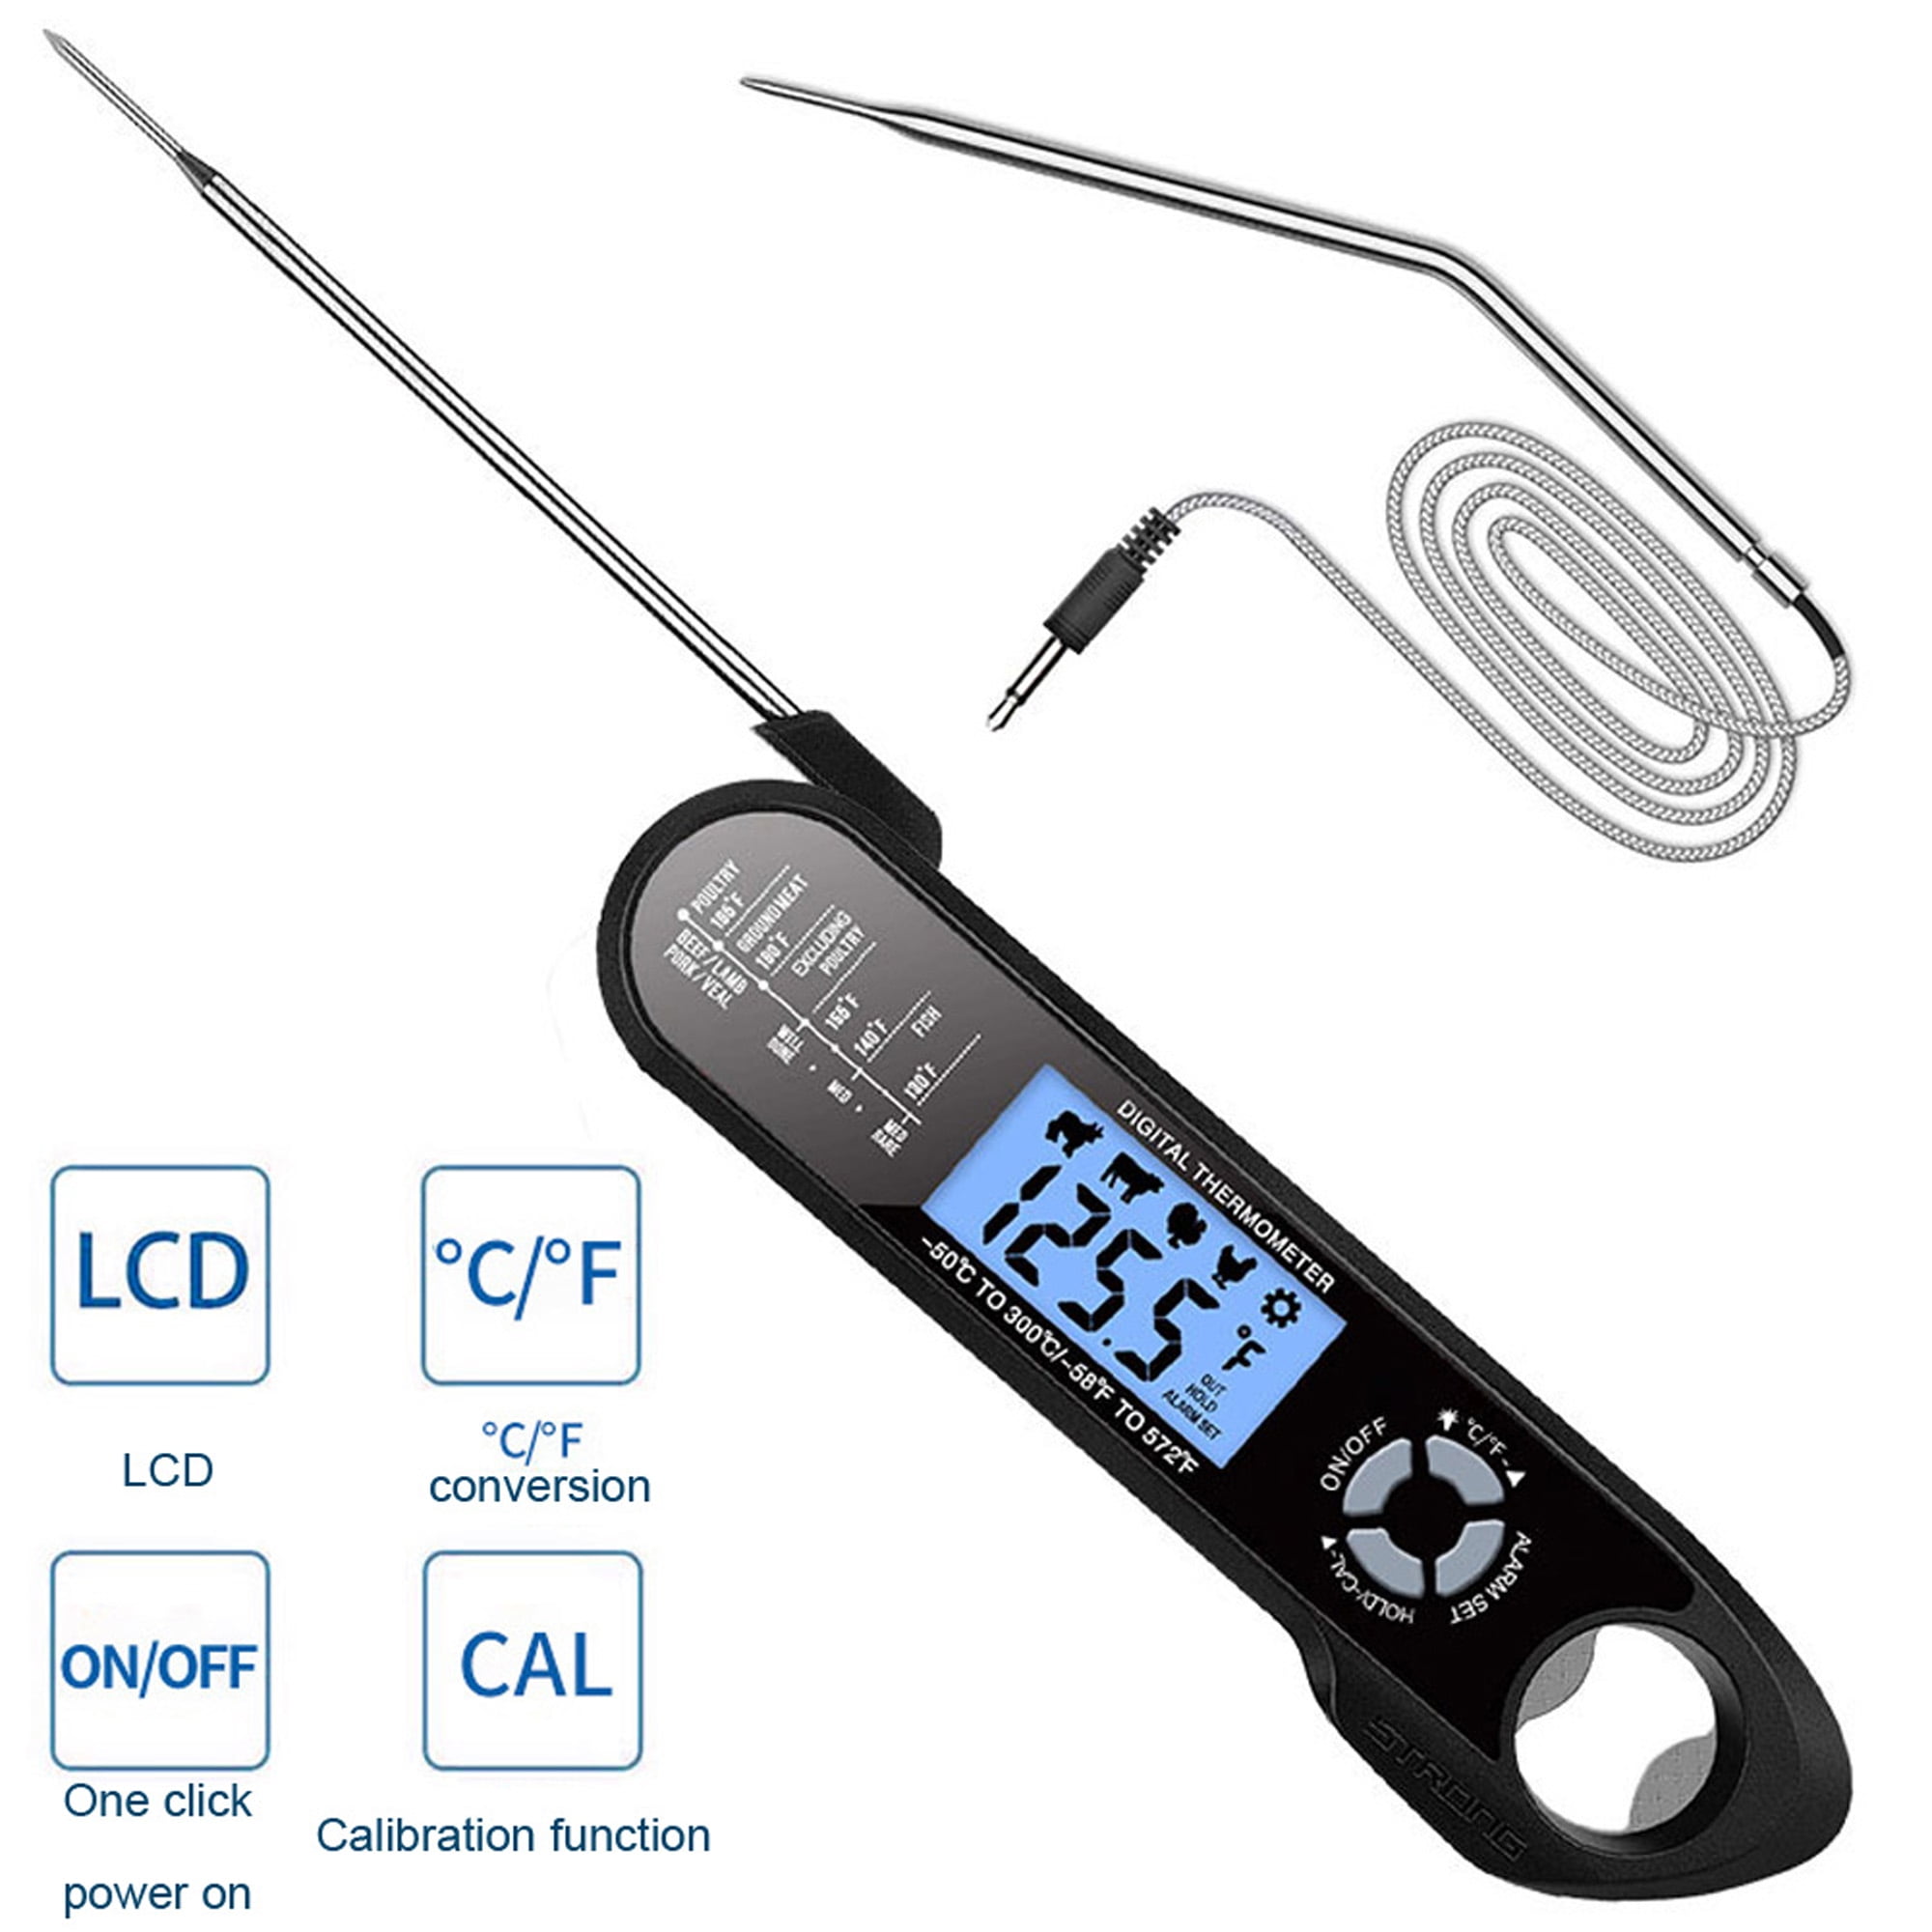 BLACK Temp LCD Display/Voice Reading Function/℃ and ℉ Convertible/Backlight/G-Sensor Screen Rotation/FDA Approved Probe for Kitchen and Outdoor Cooking BBQ iHomey Instant Read Meat Thermometer 